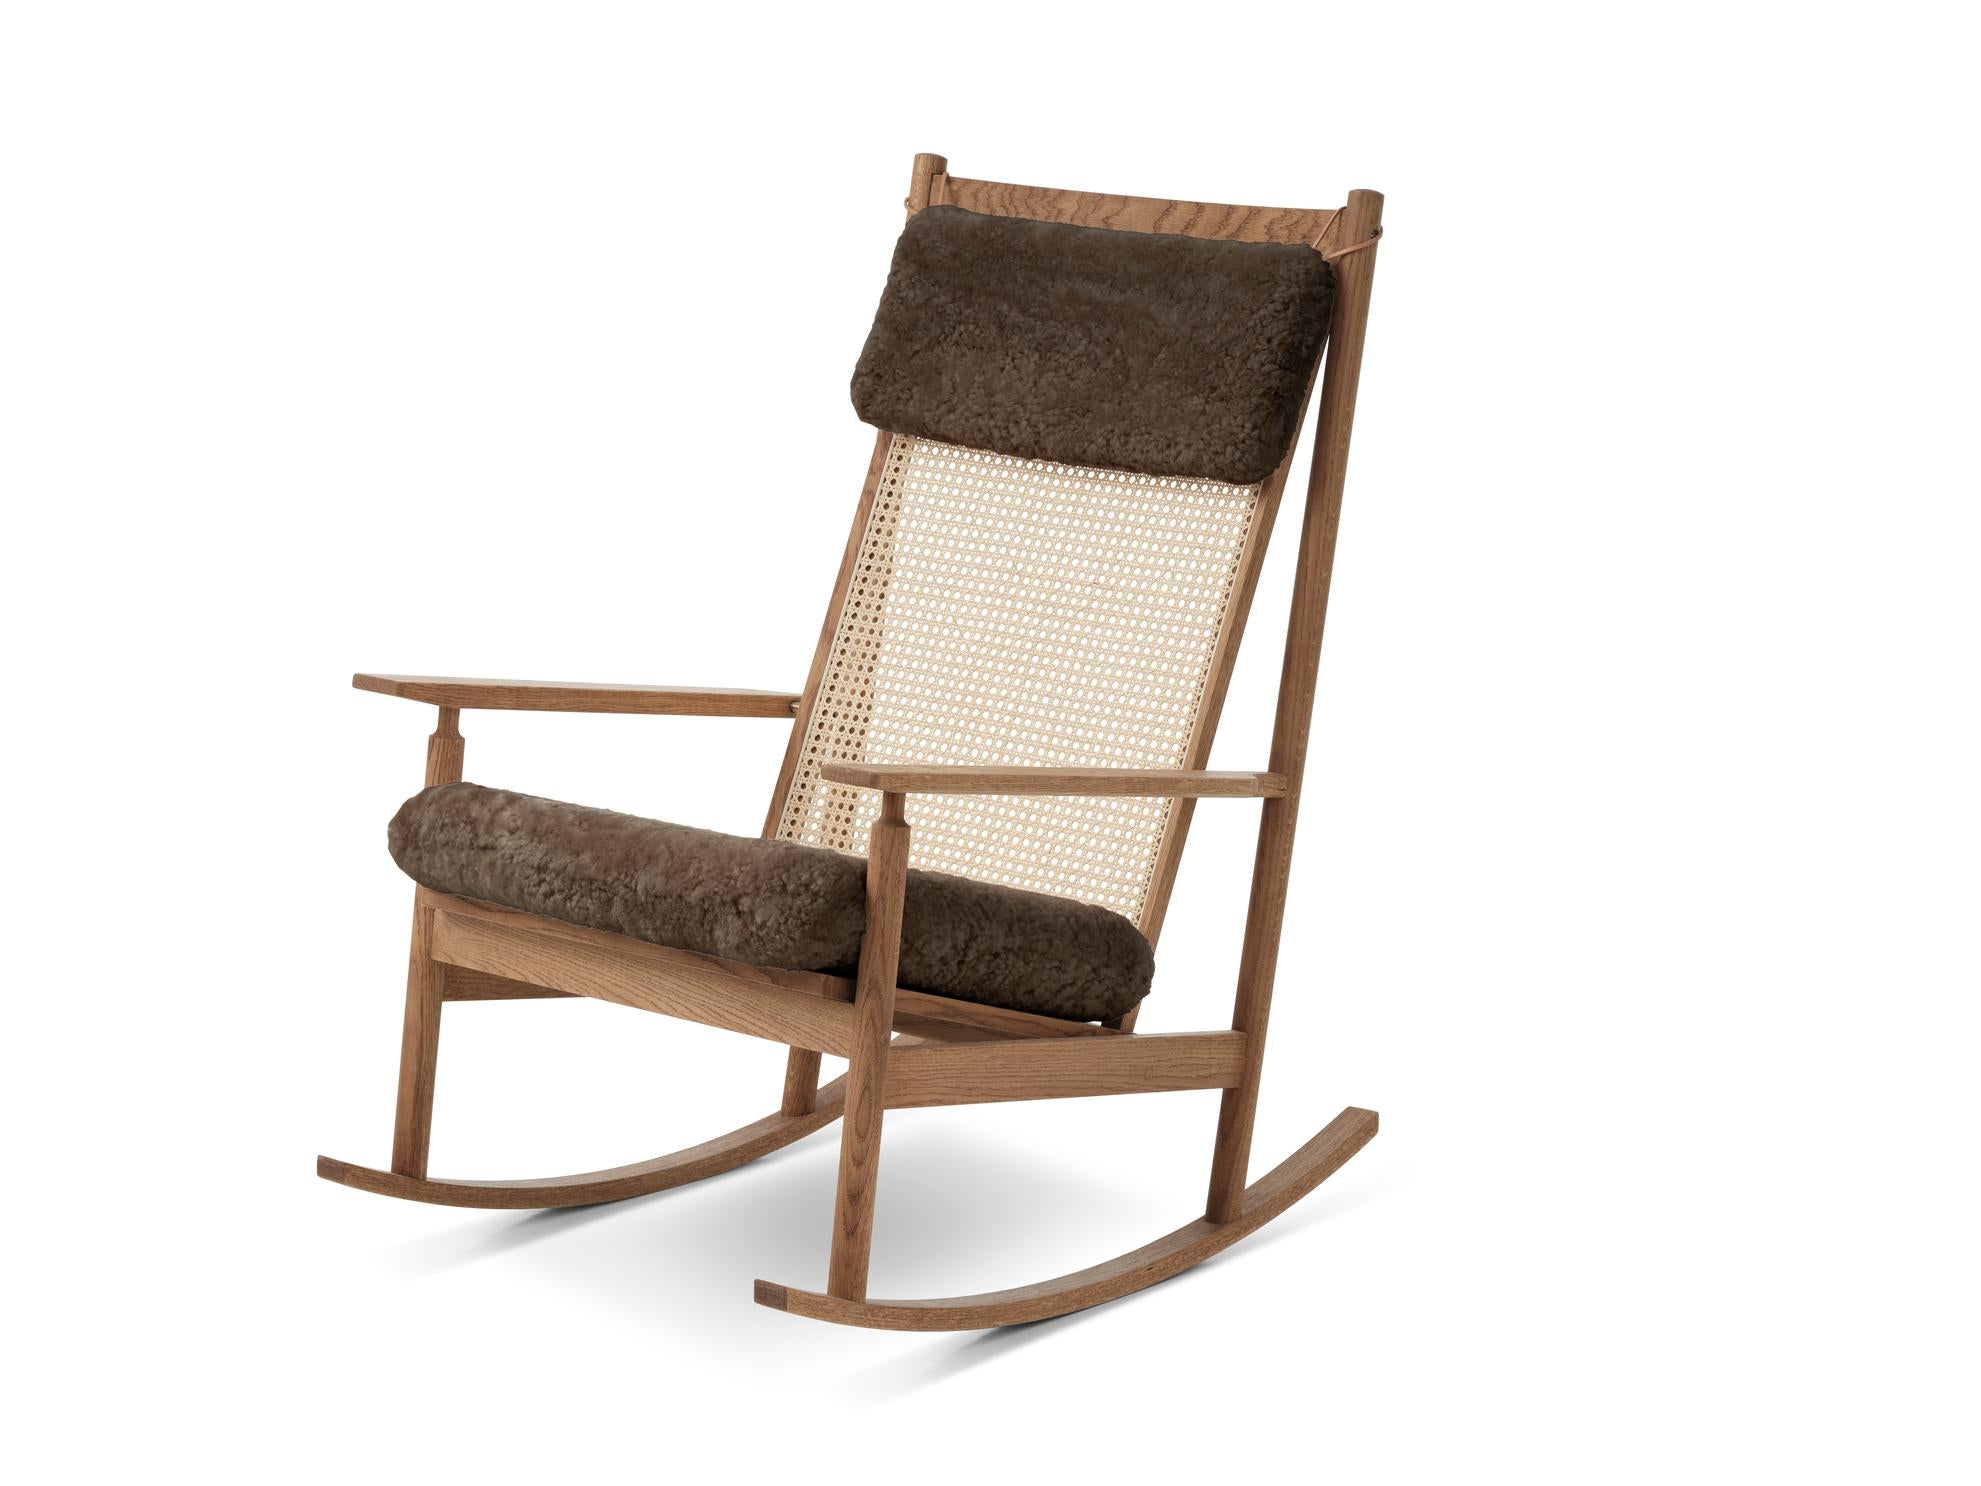 Swing rocking chair sheepskin teak drake by Warm Nordic
Dimensions: D91 x W68 x H 103 cm
Material: Wood, Foam, Rubber springs, French cane, Textile or leather upholstery, Teak, Sheepskin upholstery
Weight: 16.5 kg
Also available in different